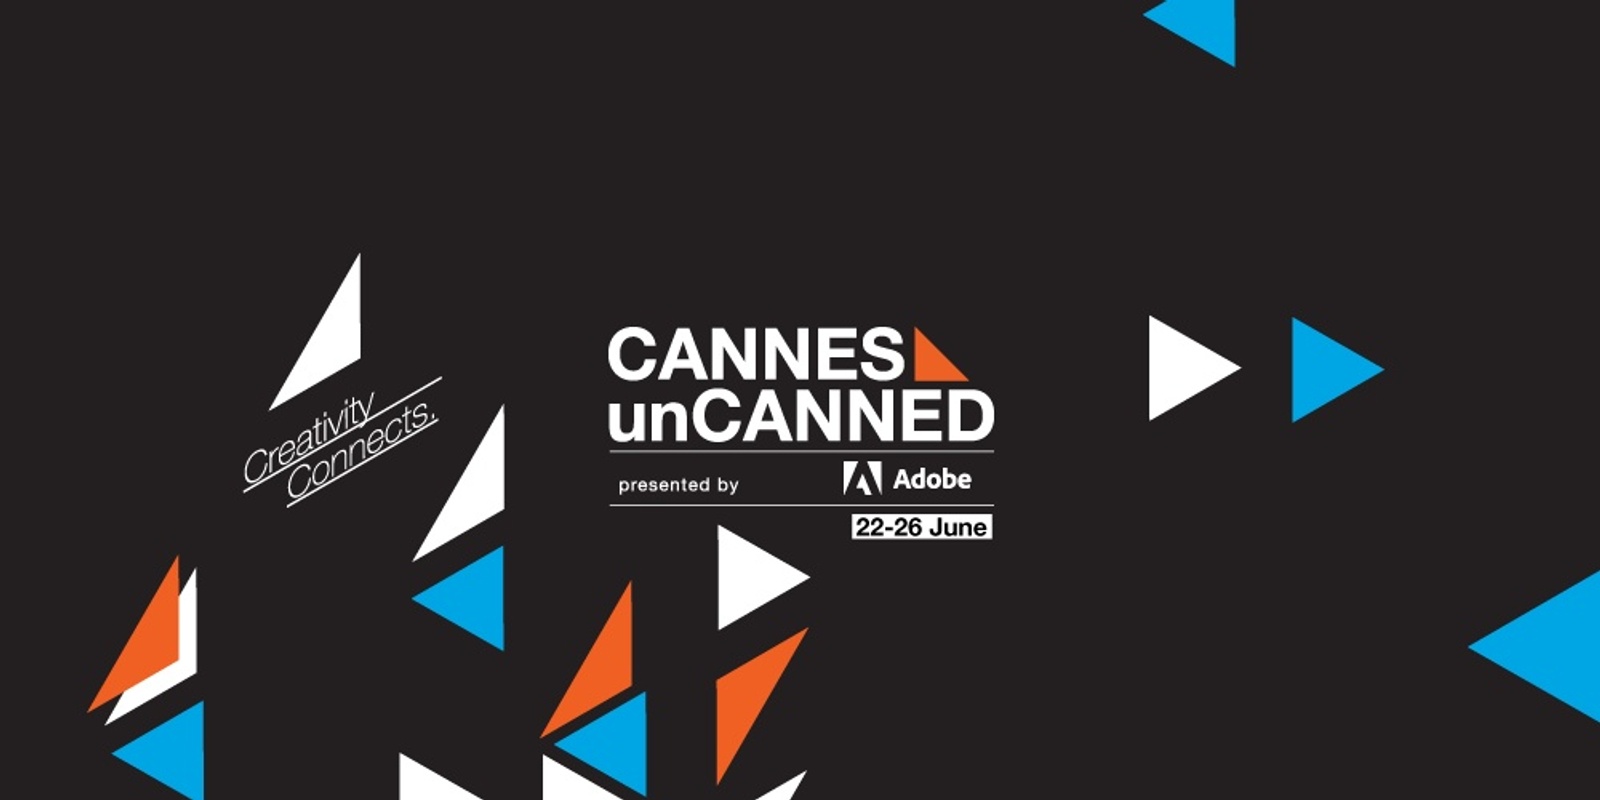 Banner image for Cannes Un-Canned 2020, presented by Adobe